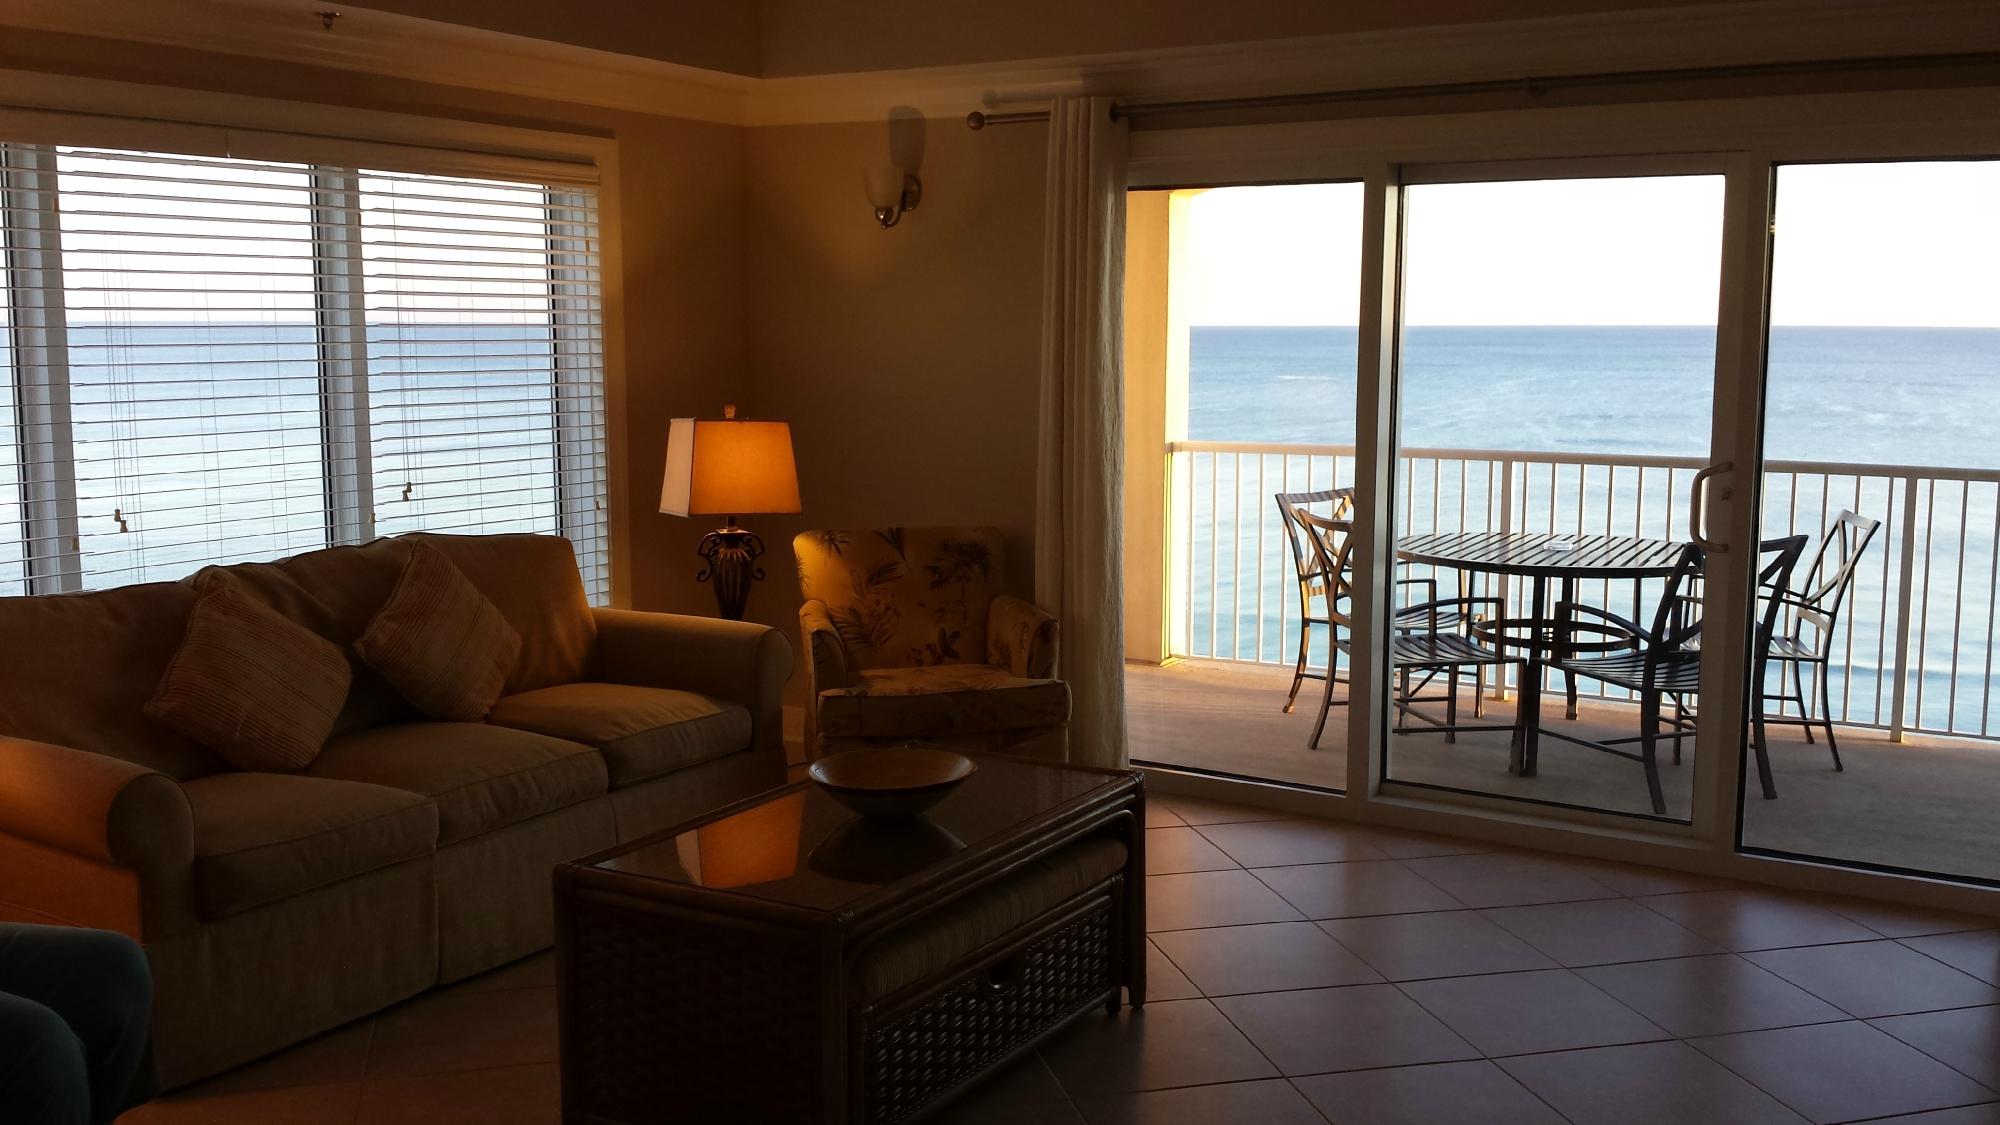 Escapes! To The Gulf At Orange Beach living room